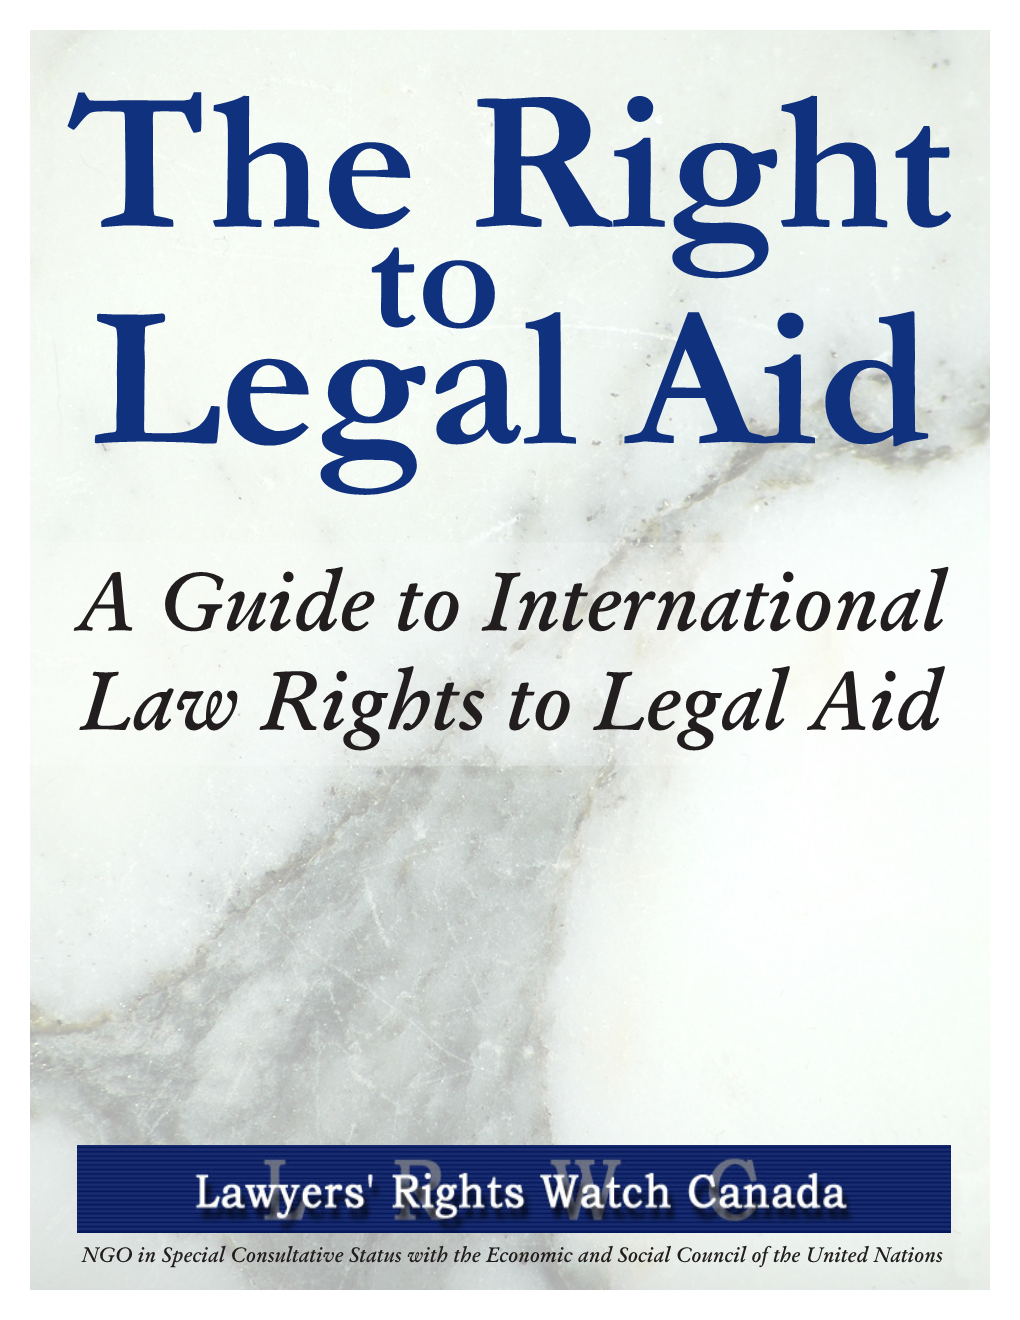 A Guide to International Law Rights to Legal Aid